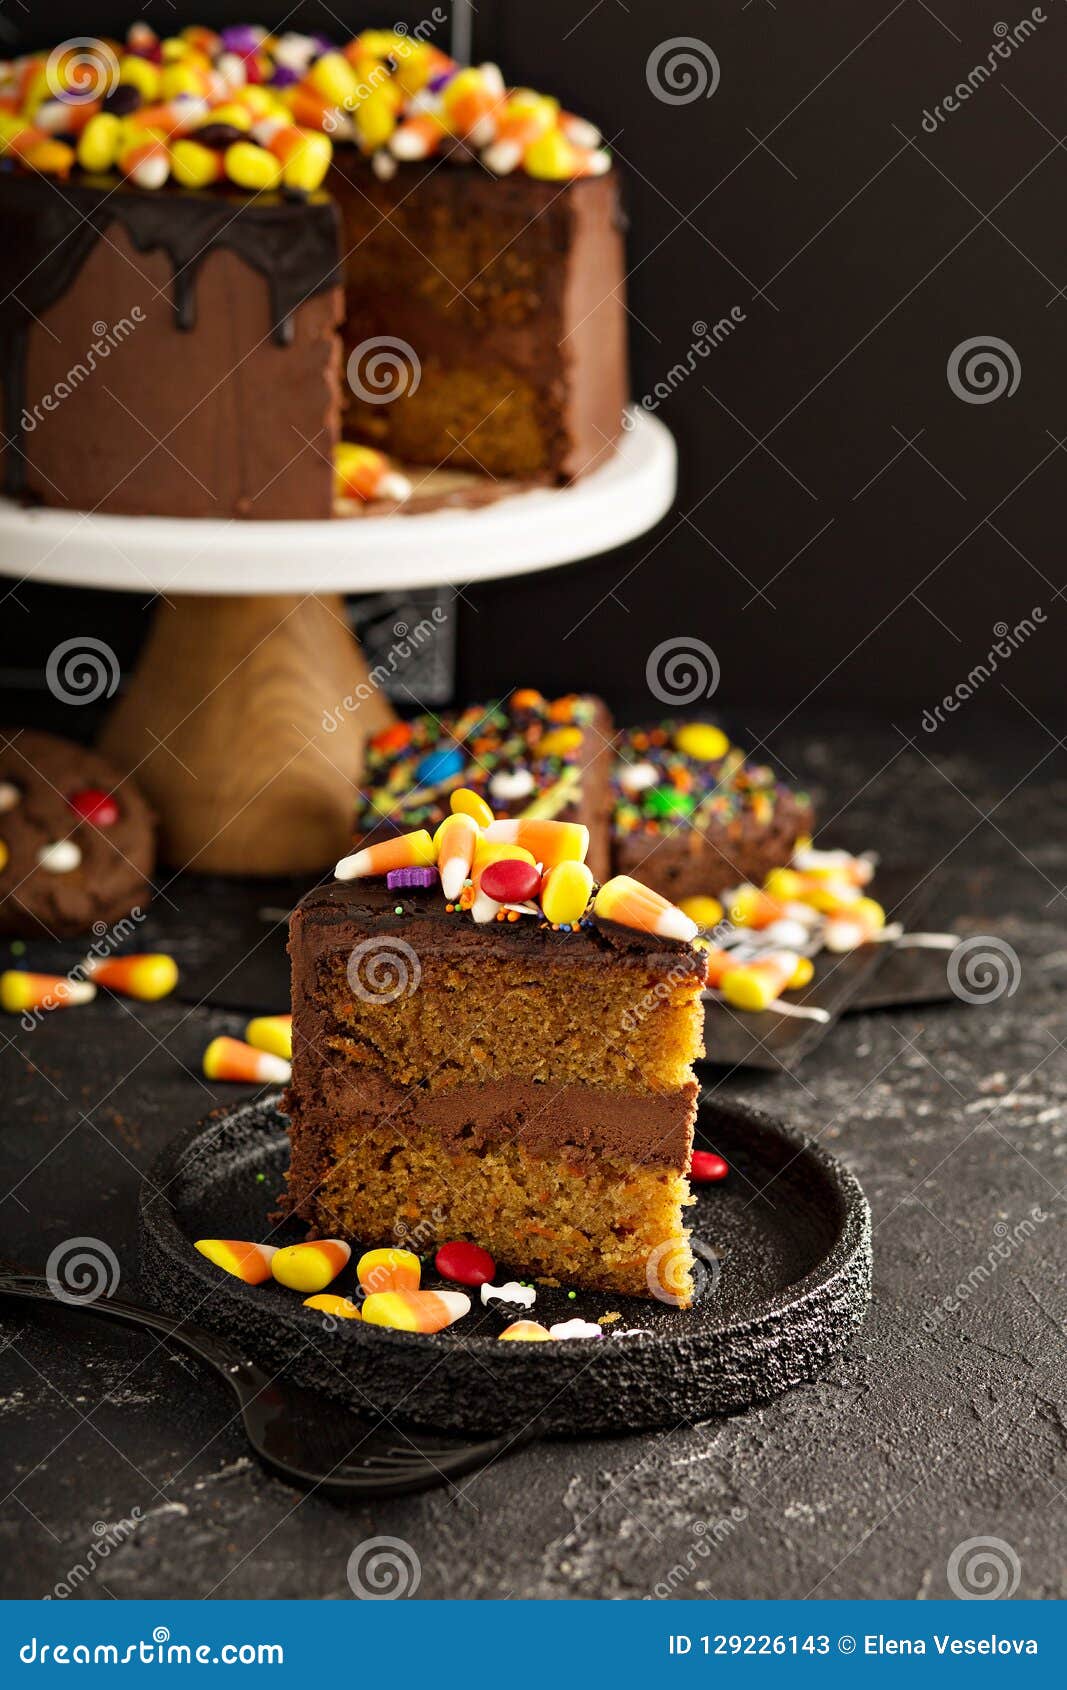 Chocolate and Candy Corn Cake Stock Image - Image of food, frosting ...